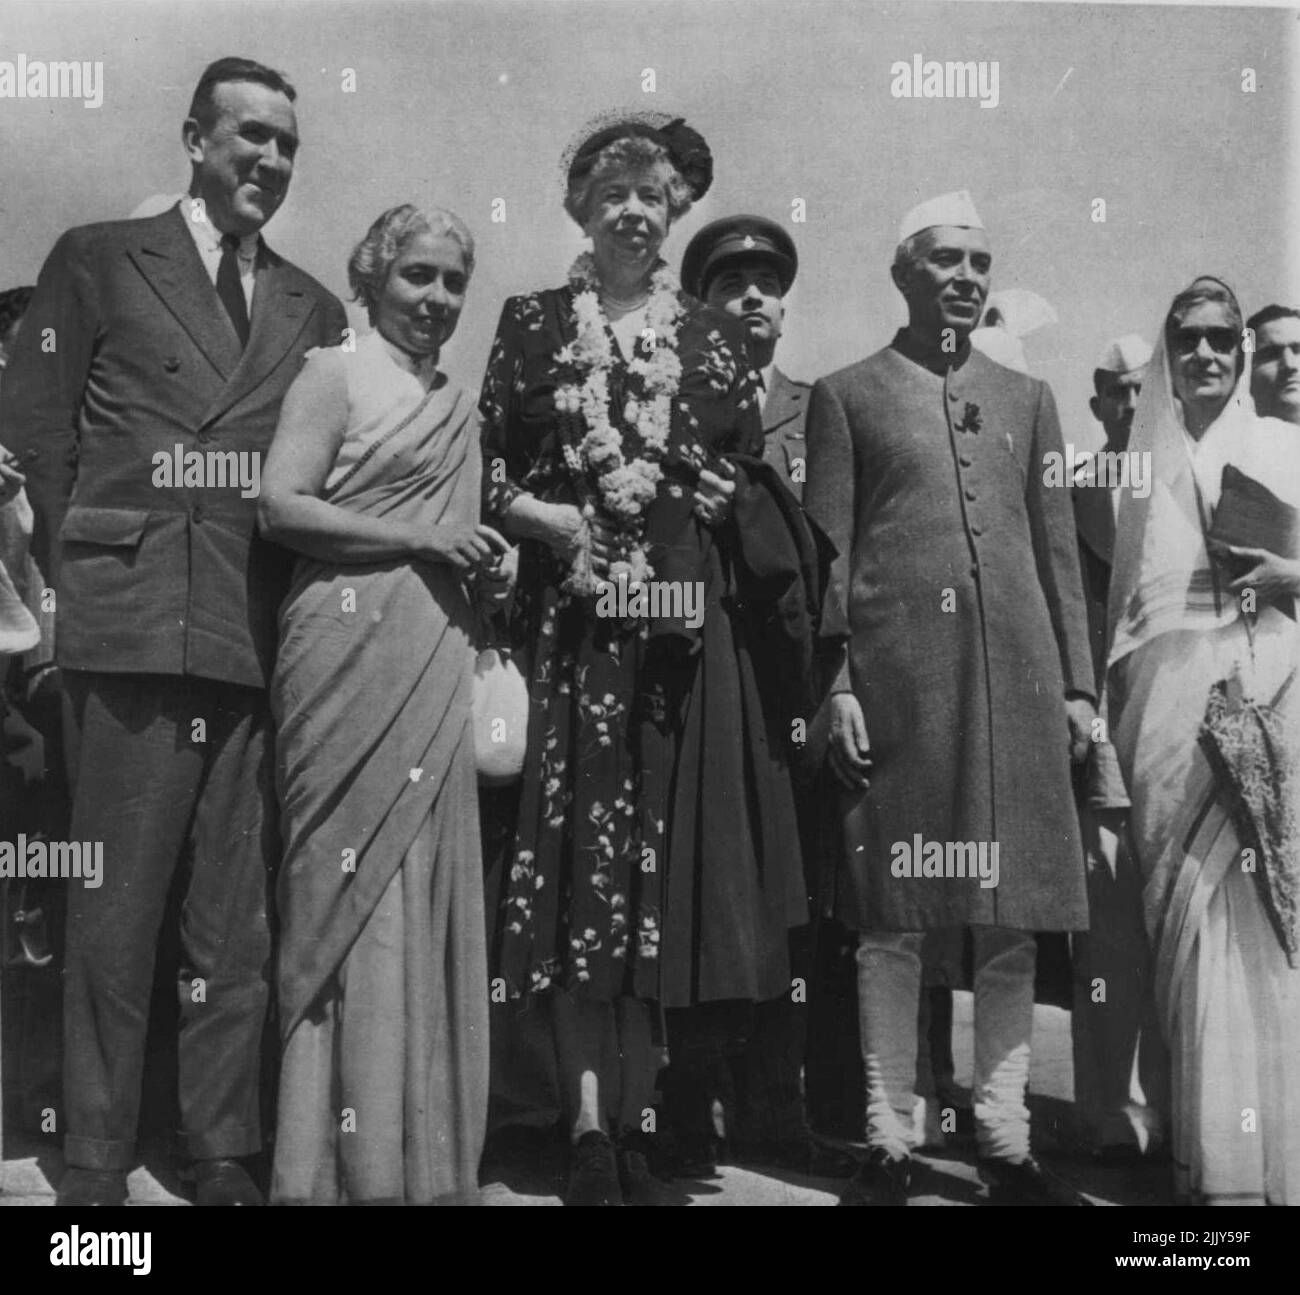 Indian Welcome For Mrs. FDR - A welcoming garland of blossoms adrons the neck of Mrs. Elanor Roosevelt as she is welcomed to New Delhi by members of India's first family last week. In group at the capital city's airport are (left to right) U.S. Ambassador to India Chester Bowles; Madame Pandit, former Indian ambassador to U.S.; Mrs. Roosevelt; Premier Jawaharlal Nehru; and Rajkumari Amrit Kaur the Premier. Mrs. Roosevelt, who previously had visited Pakistan, denied that the visit had any political significance. March 2, 1952. (Photo by AP Wirephoto). Stock Photo